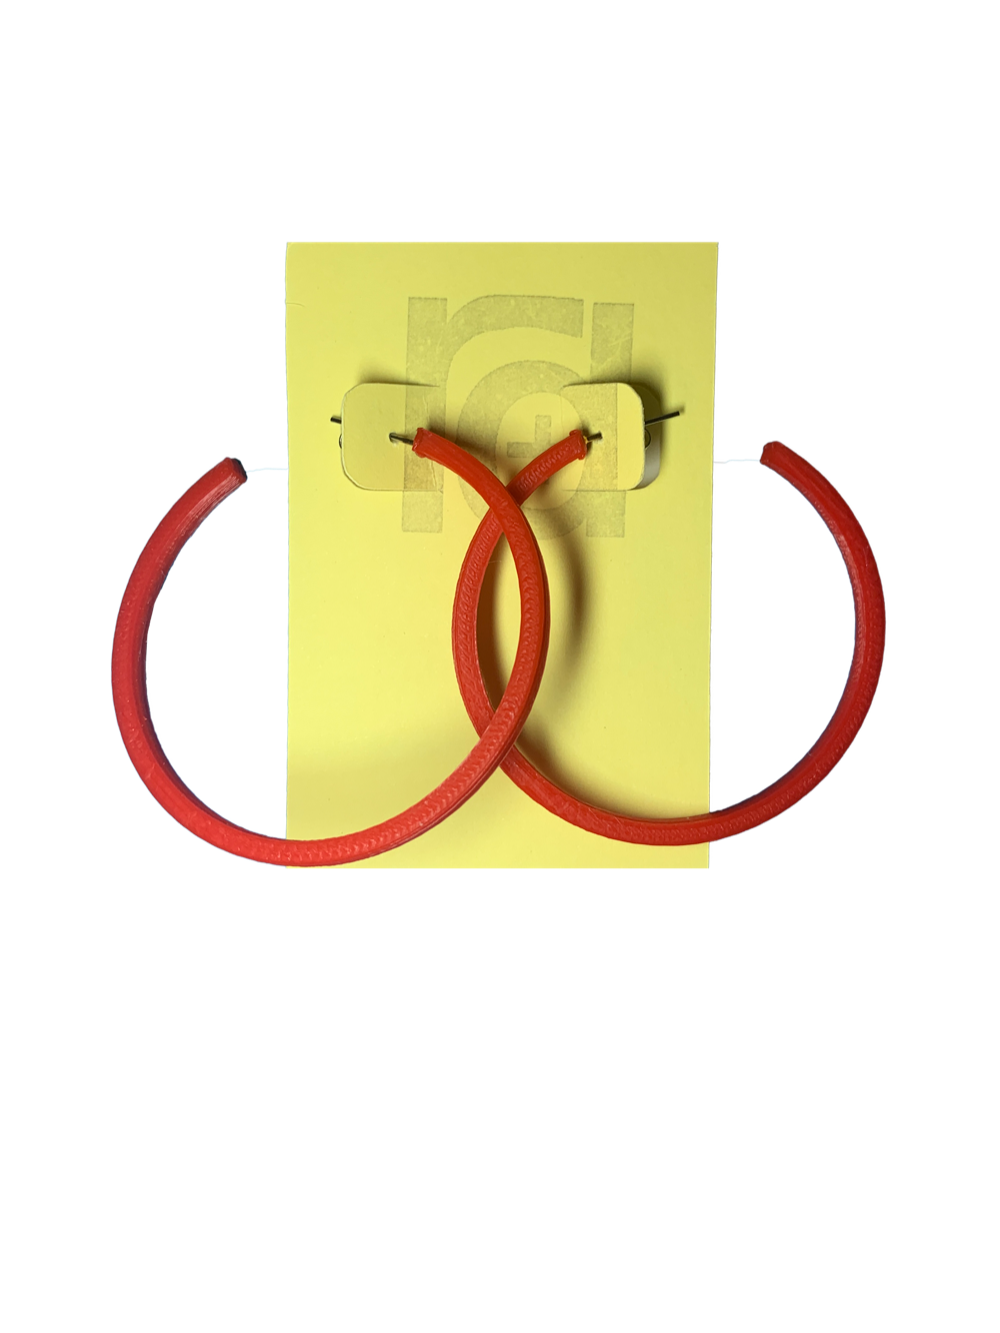 Shown on a yellow R+D card are two 3D printed hoop earrings. They are large two inch hoops in a bright red that are lightweight and plant based. 